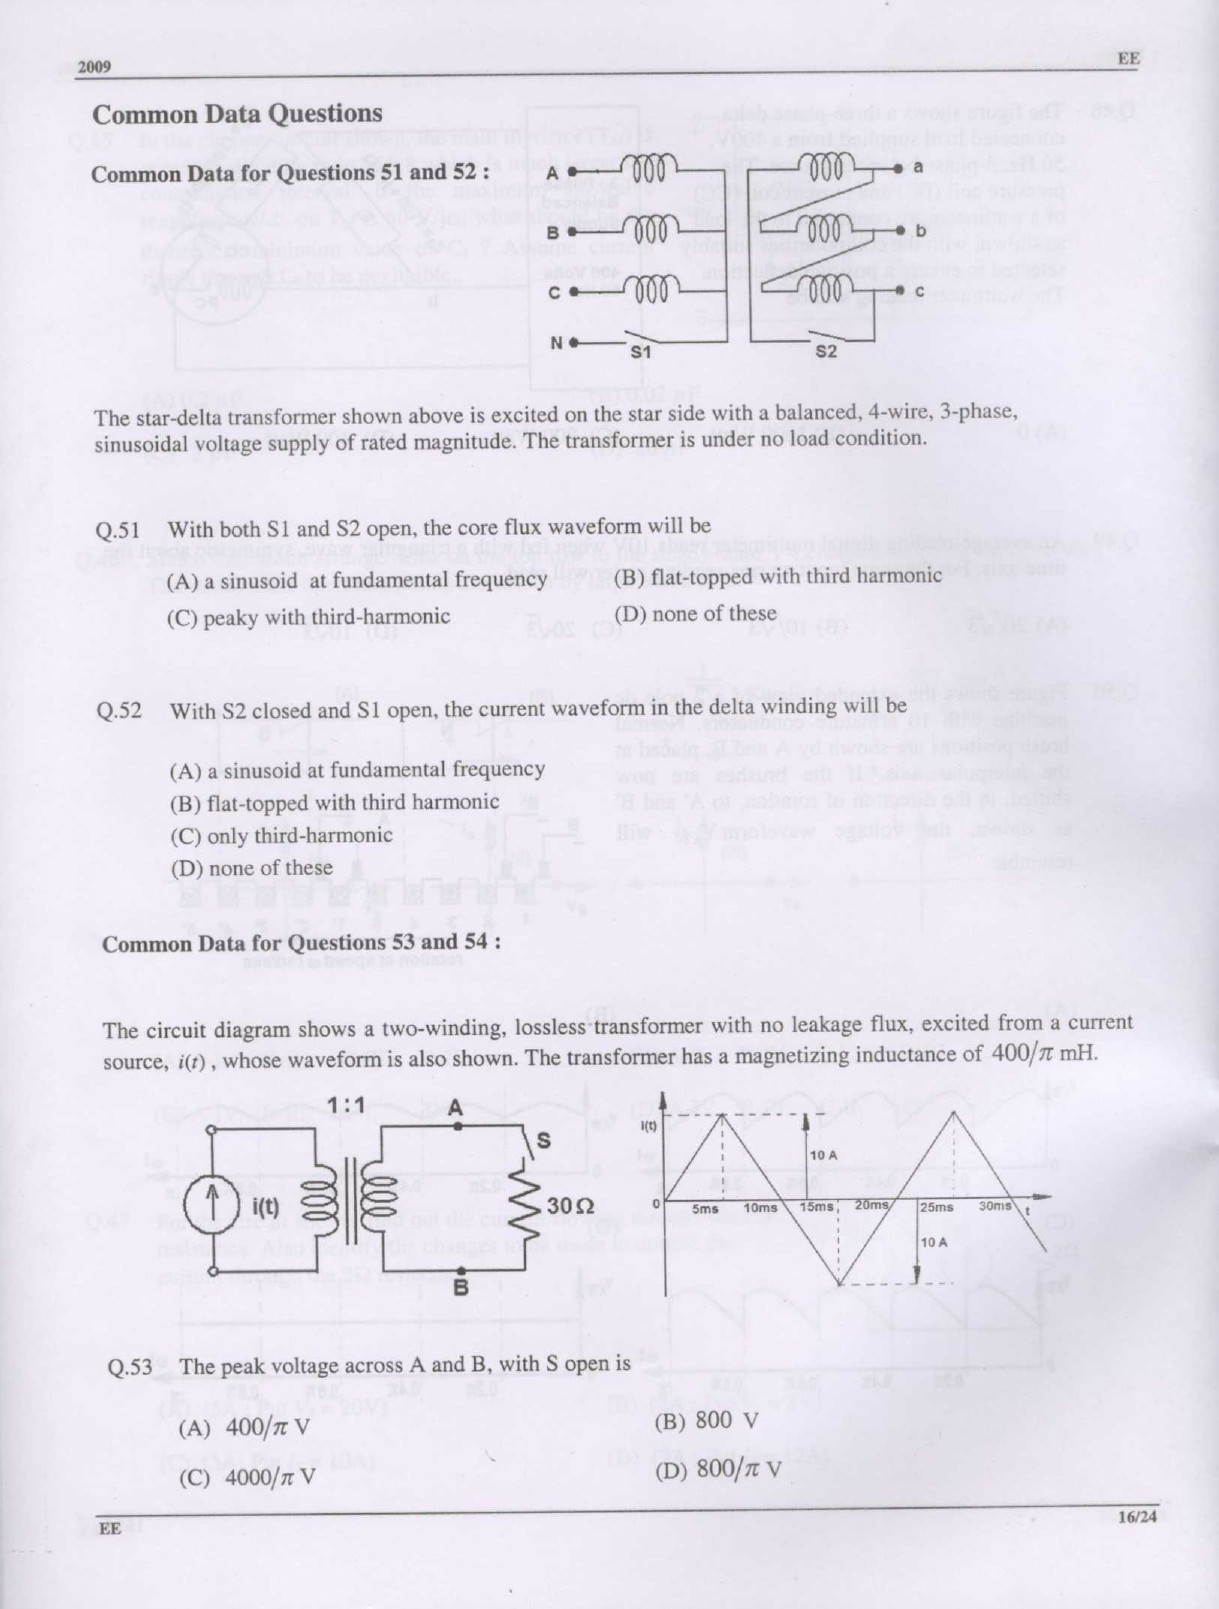 GATE Exam Question Paper 2009 Electrical Engineering 16